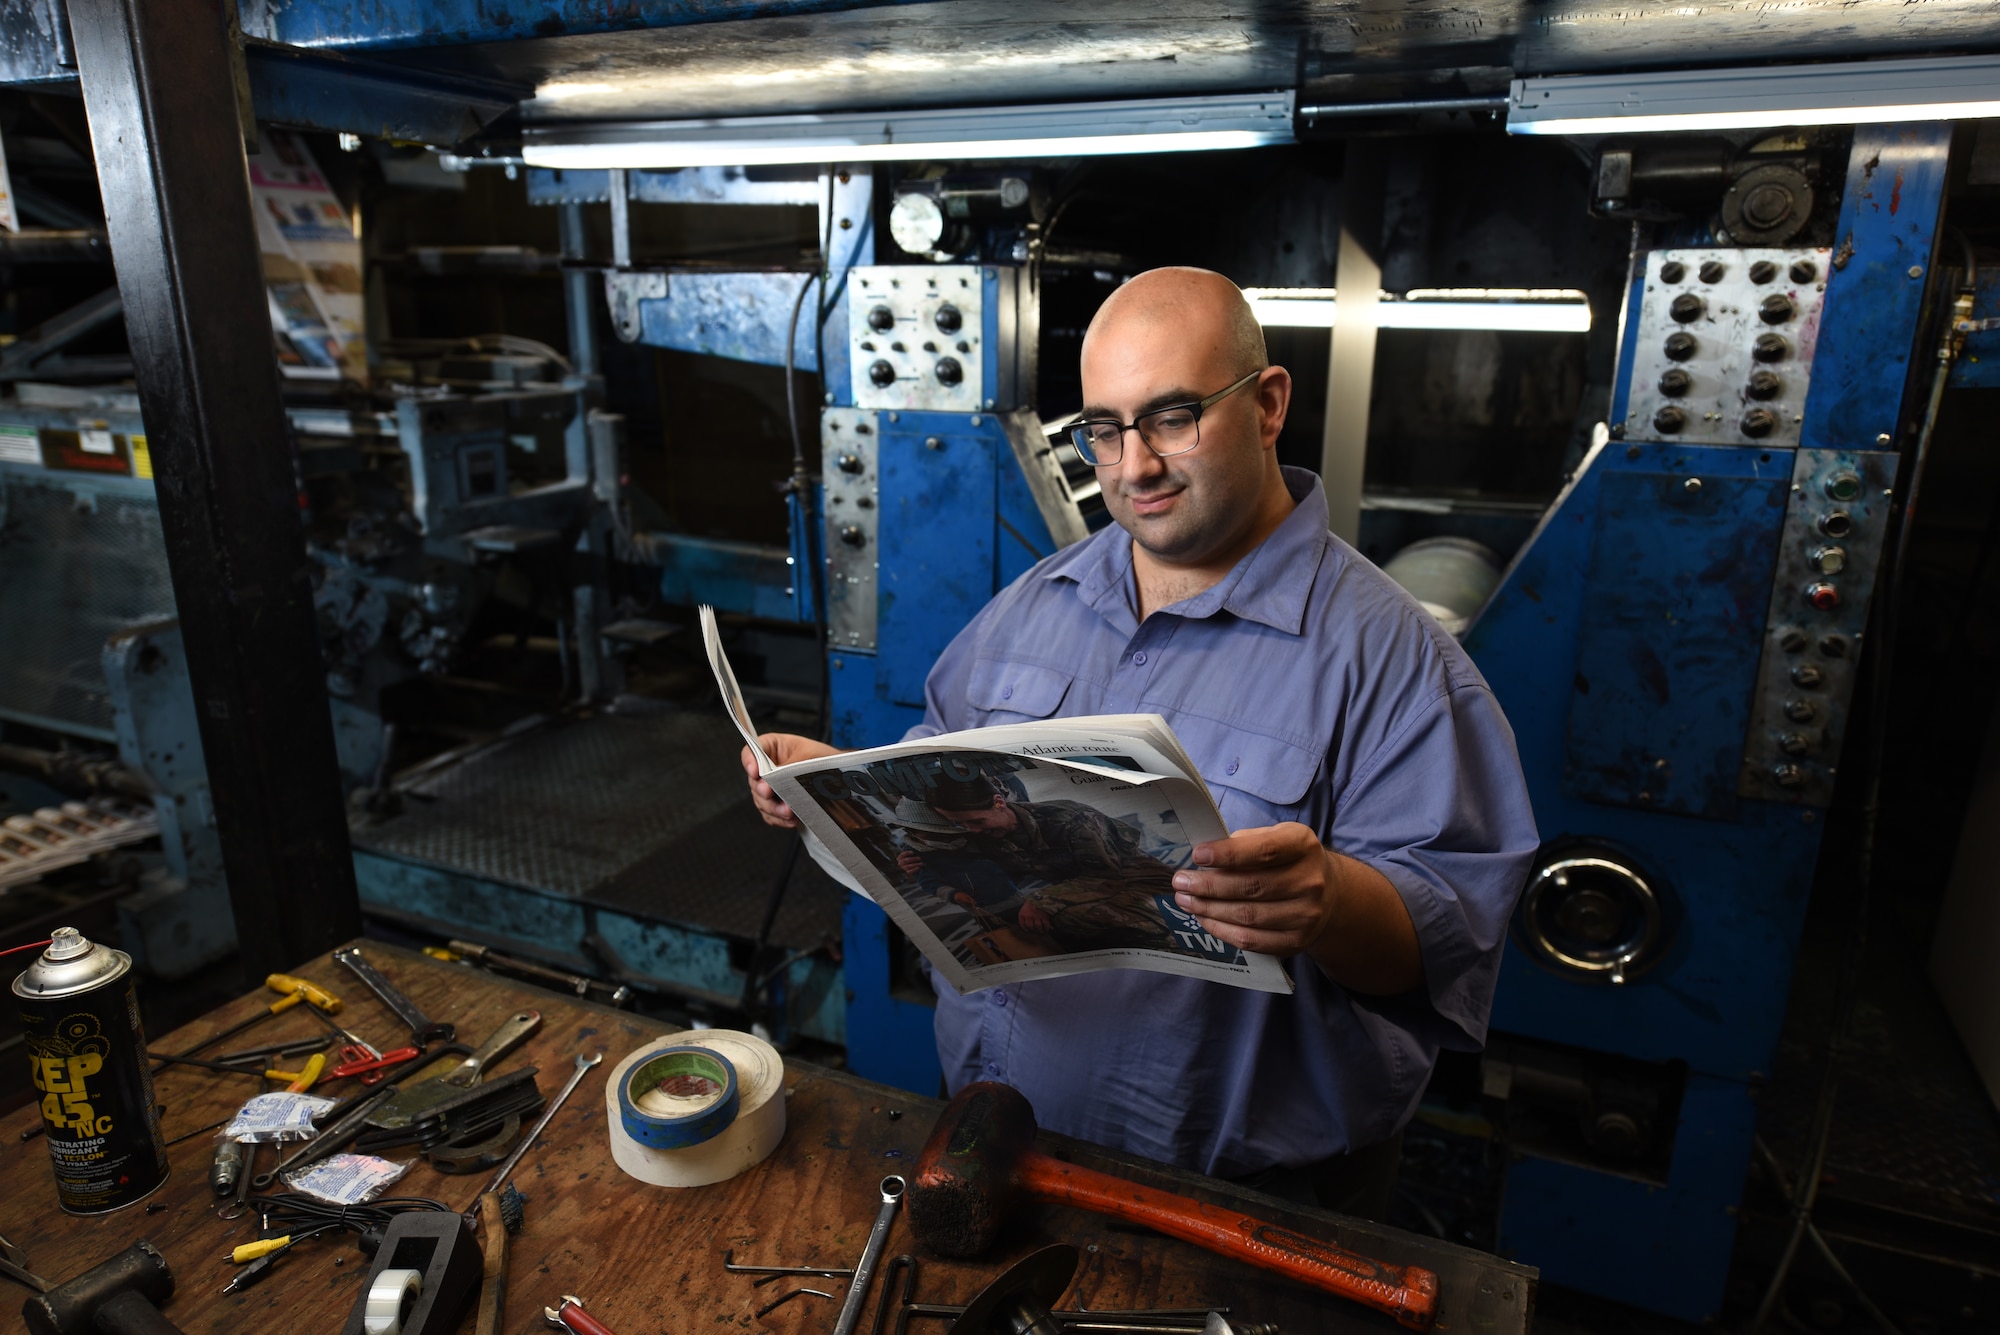 Nick DeCicco, Tailwind editor, poses for a photo May 4, 2018, at the Daily Republic Newspaper Office in Fairfield, Calif. DeCicco works at the Daily Republic, which houses the printing press where the Tailwind is printed. (U.S. Air Force photo by Staff Sgt. Amber Carter/Airman 1st Class Amy Younger)